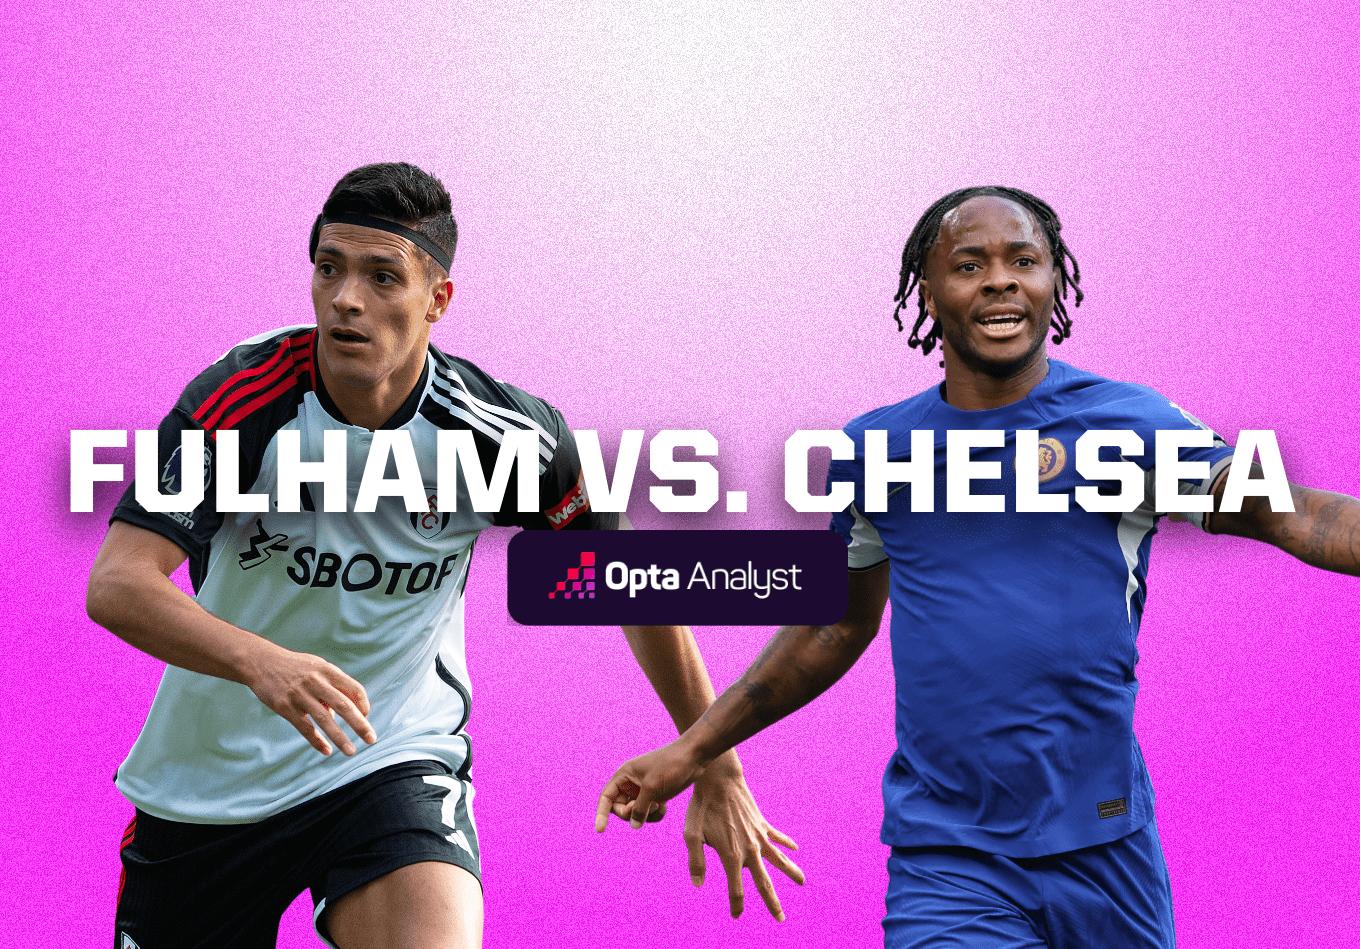 Fulham vs Chelsea: Prediction and Preview